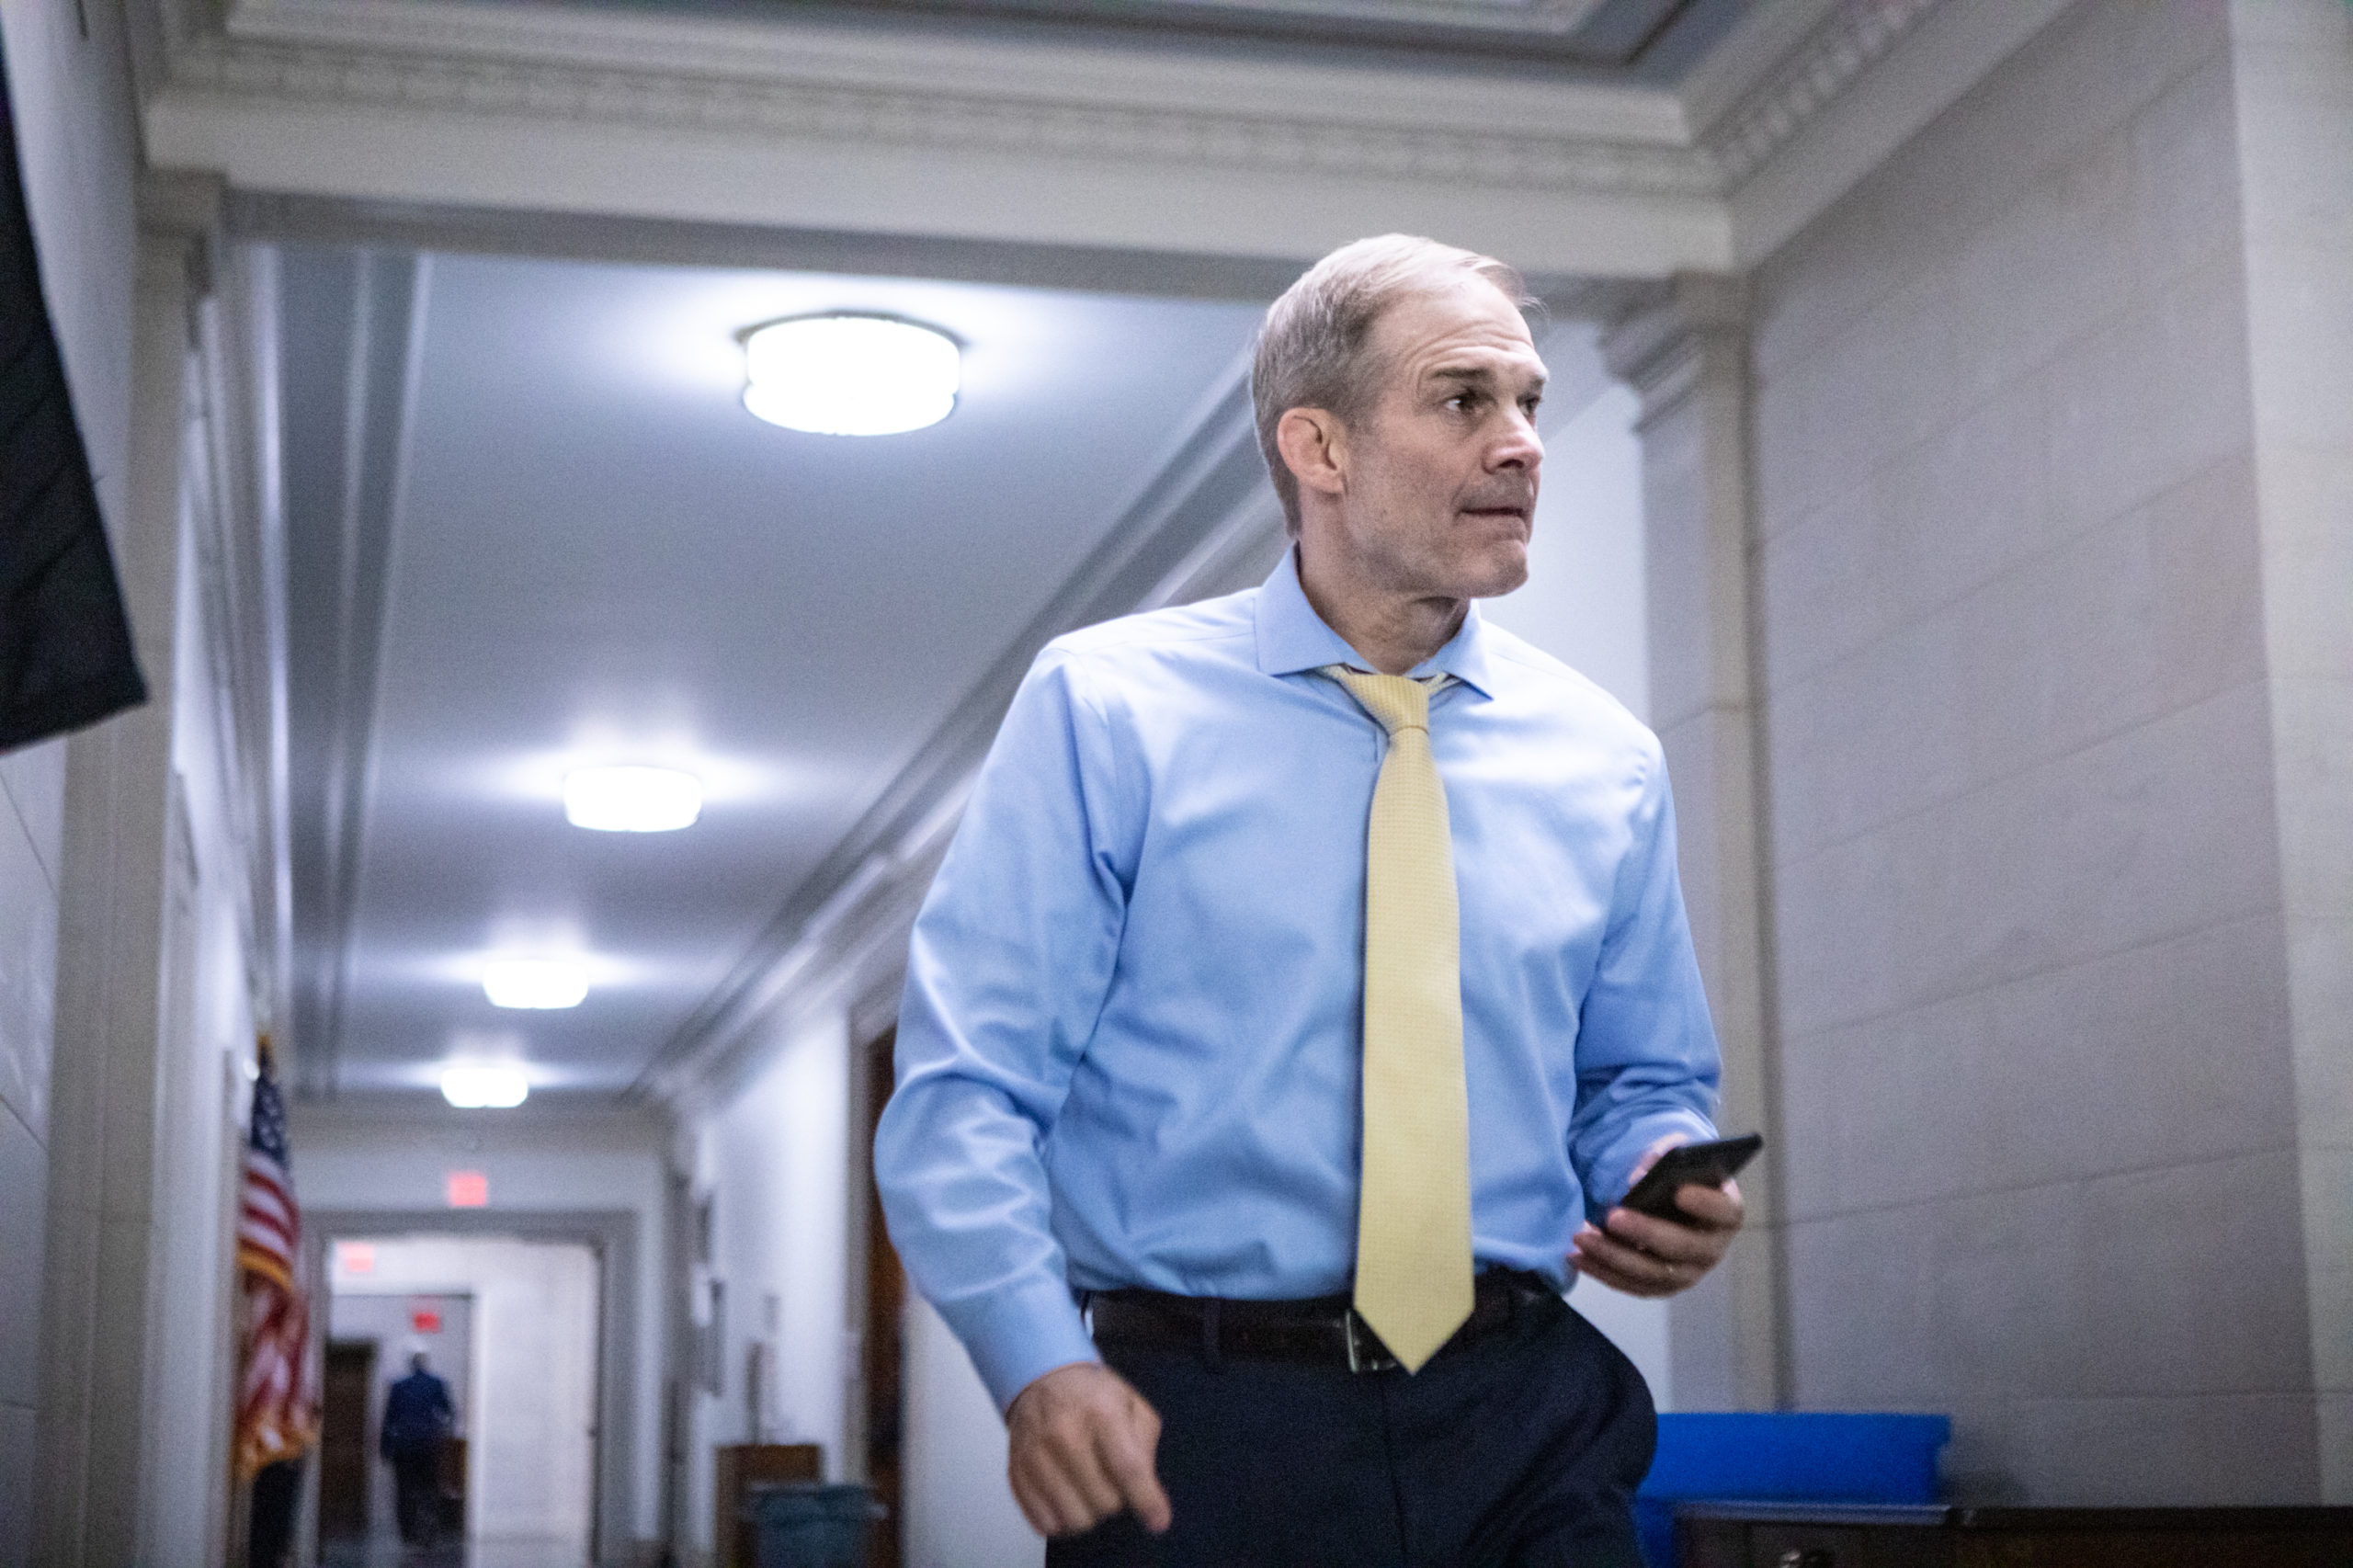 WASHINGTON, DC - OCTOBER 24: U.S. Rep. Jim Jordan (R-OH) walks through the Longworth House Office Building after the Republican conference voted to nominate Rep. Mike Johnson to be Speaker of the House on October 24, 2023 in Washington, DC. (Photo by Anna Rose Layden/Getty Images)